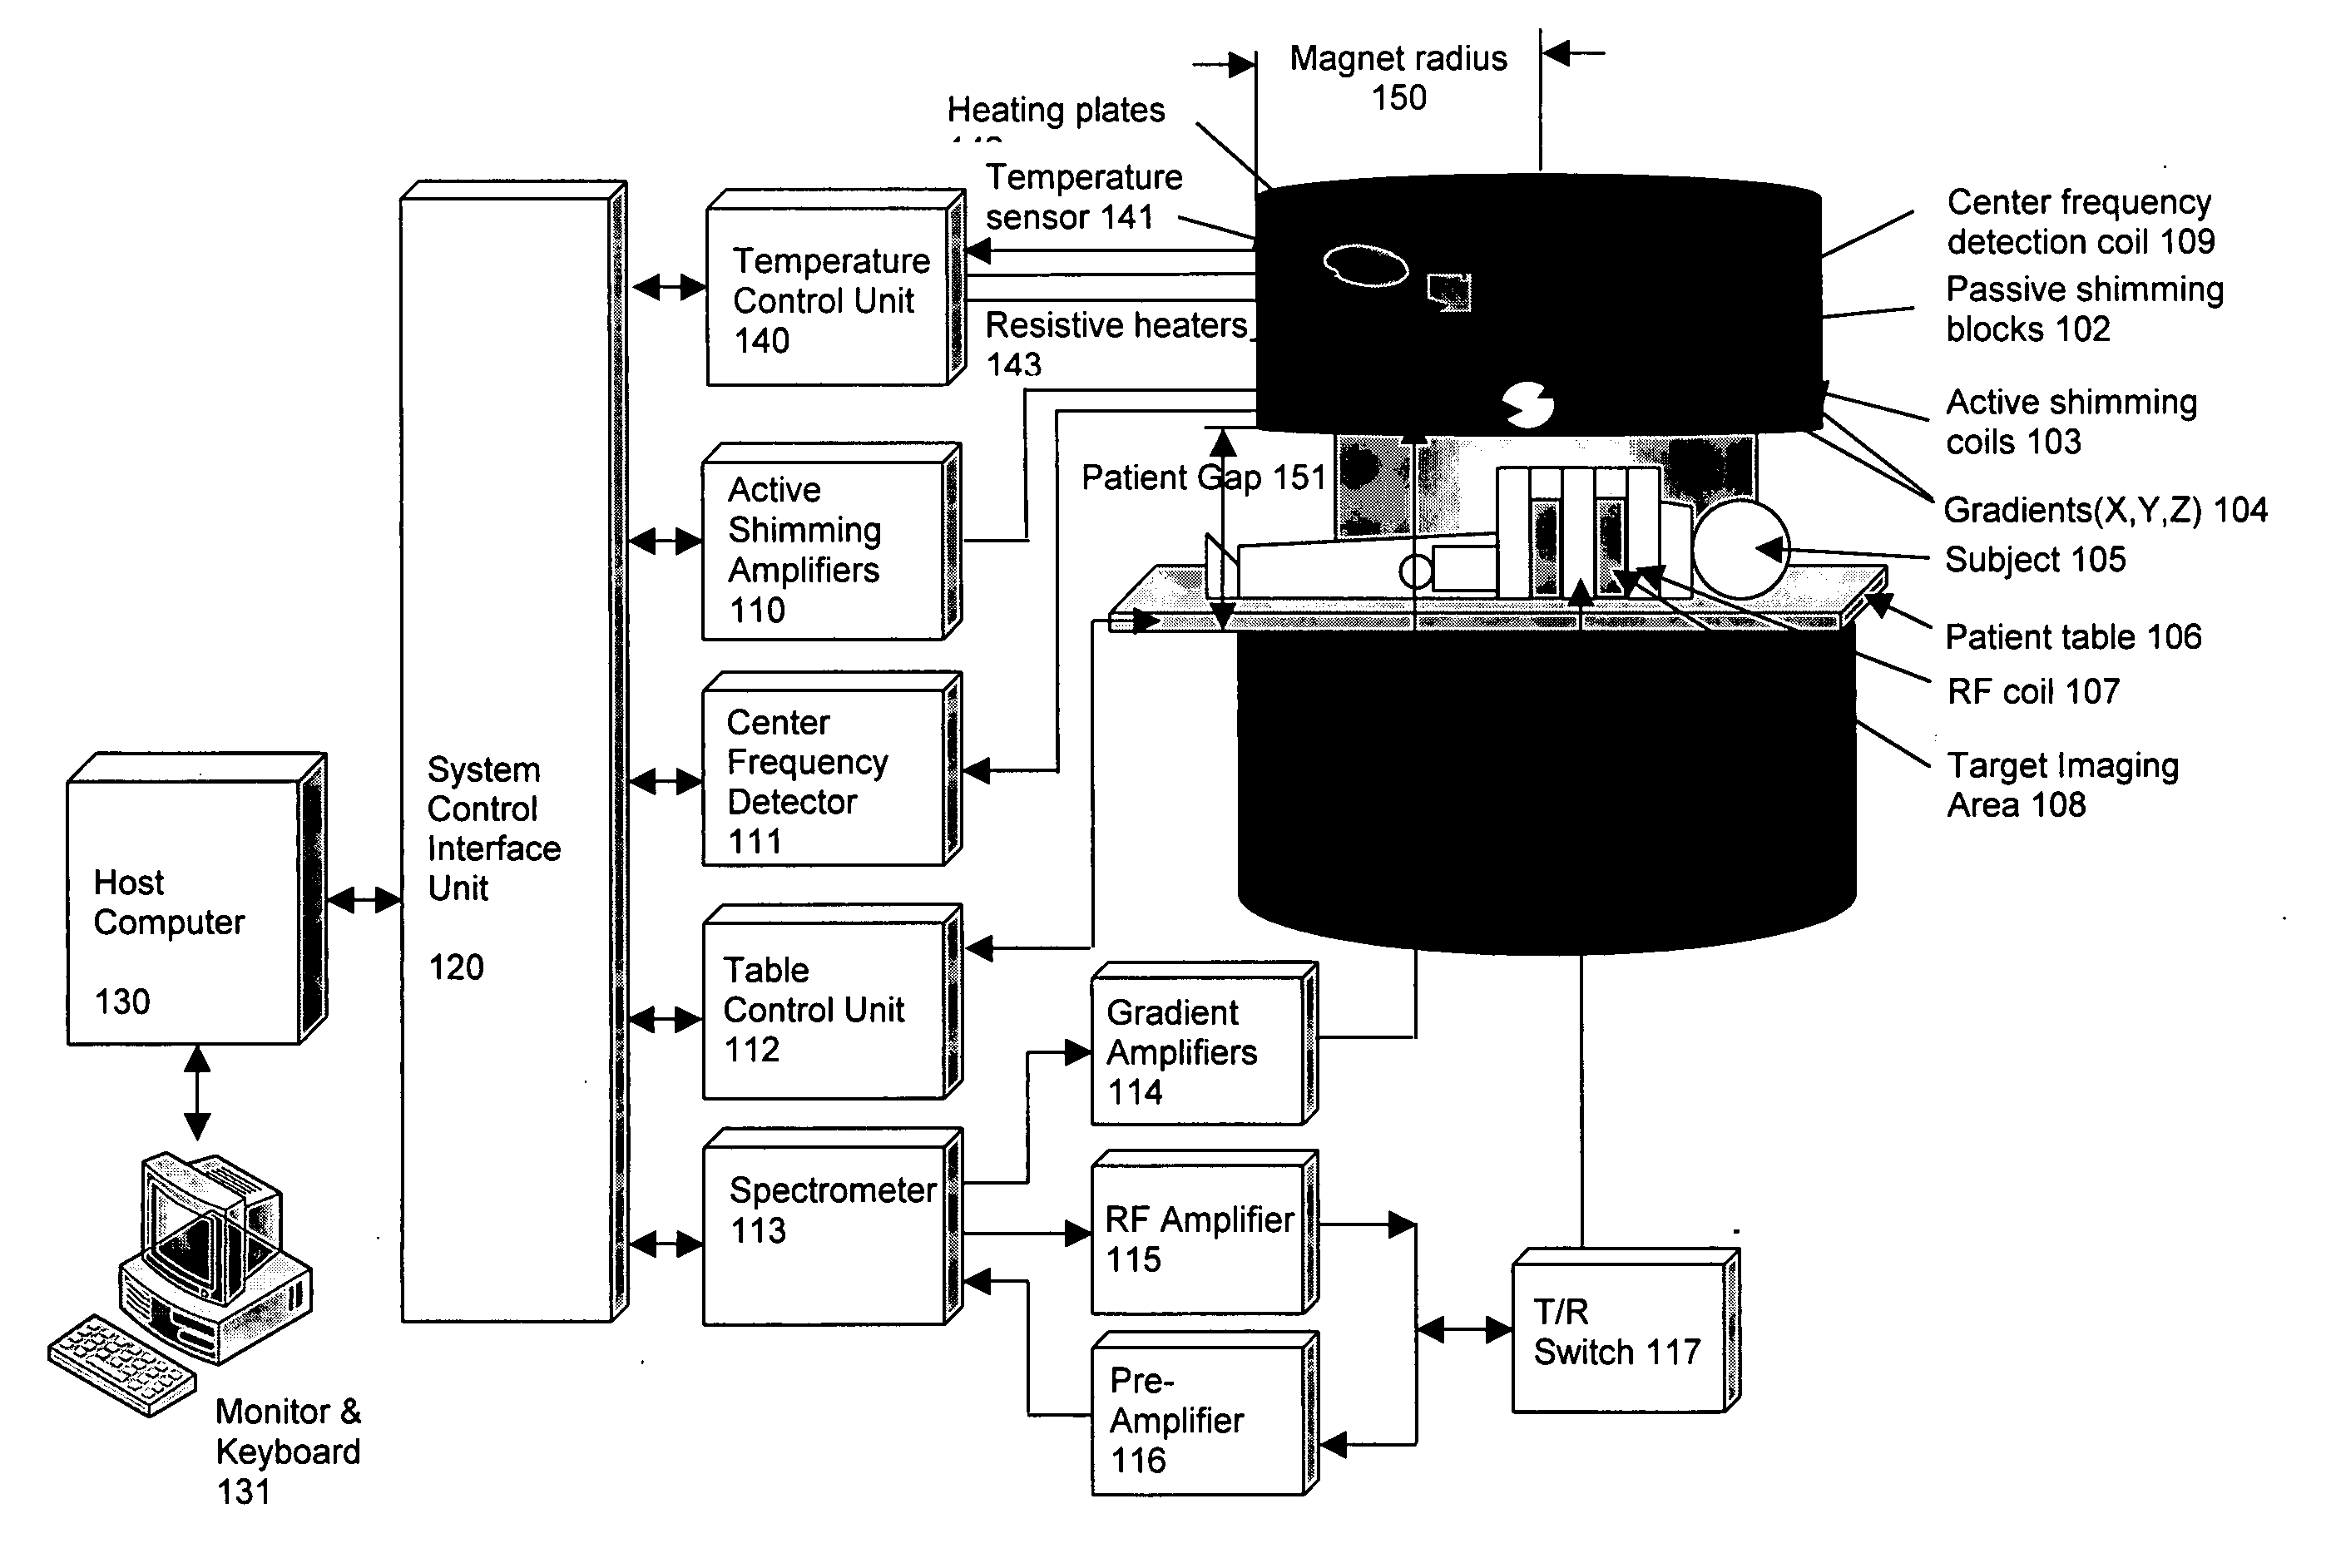 Method of using a small MRI scanner